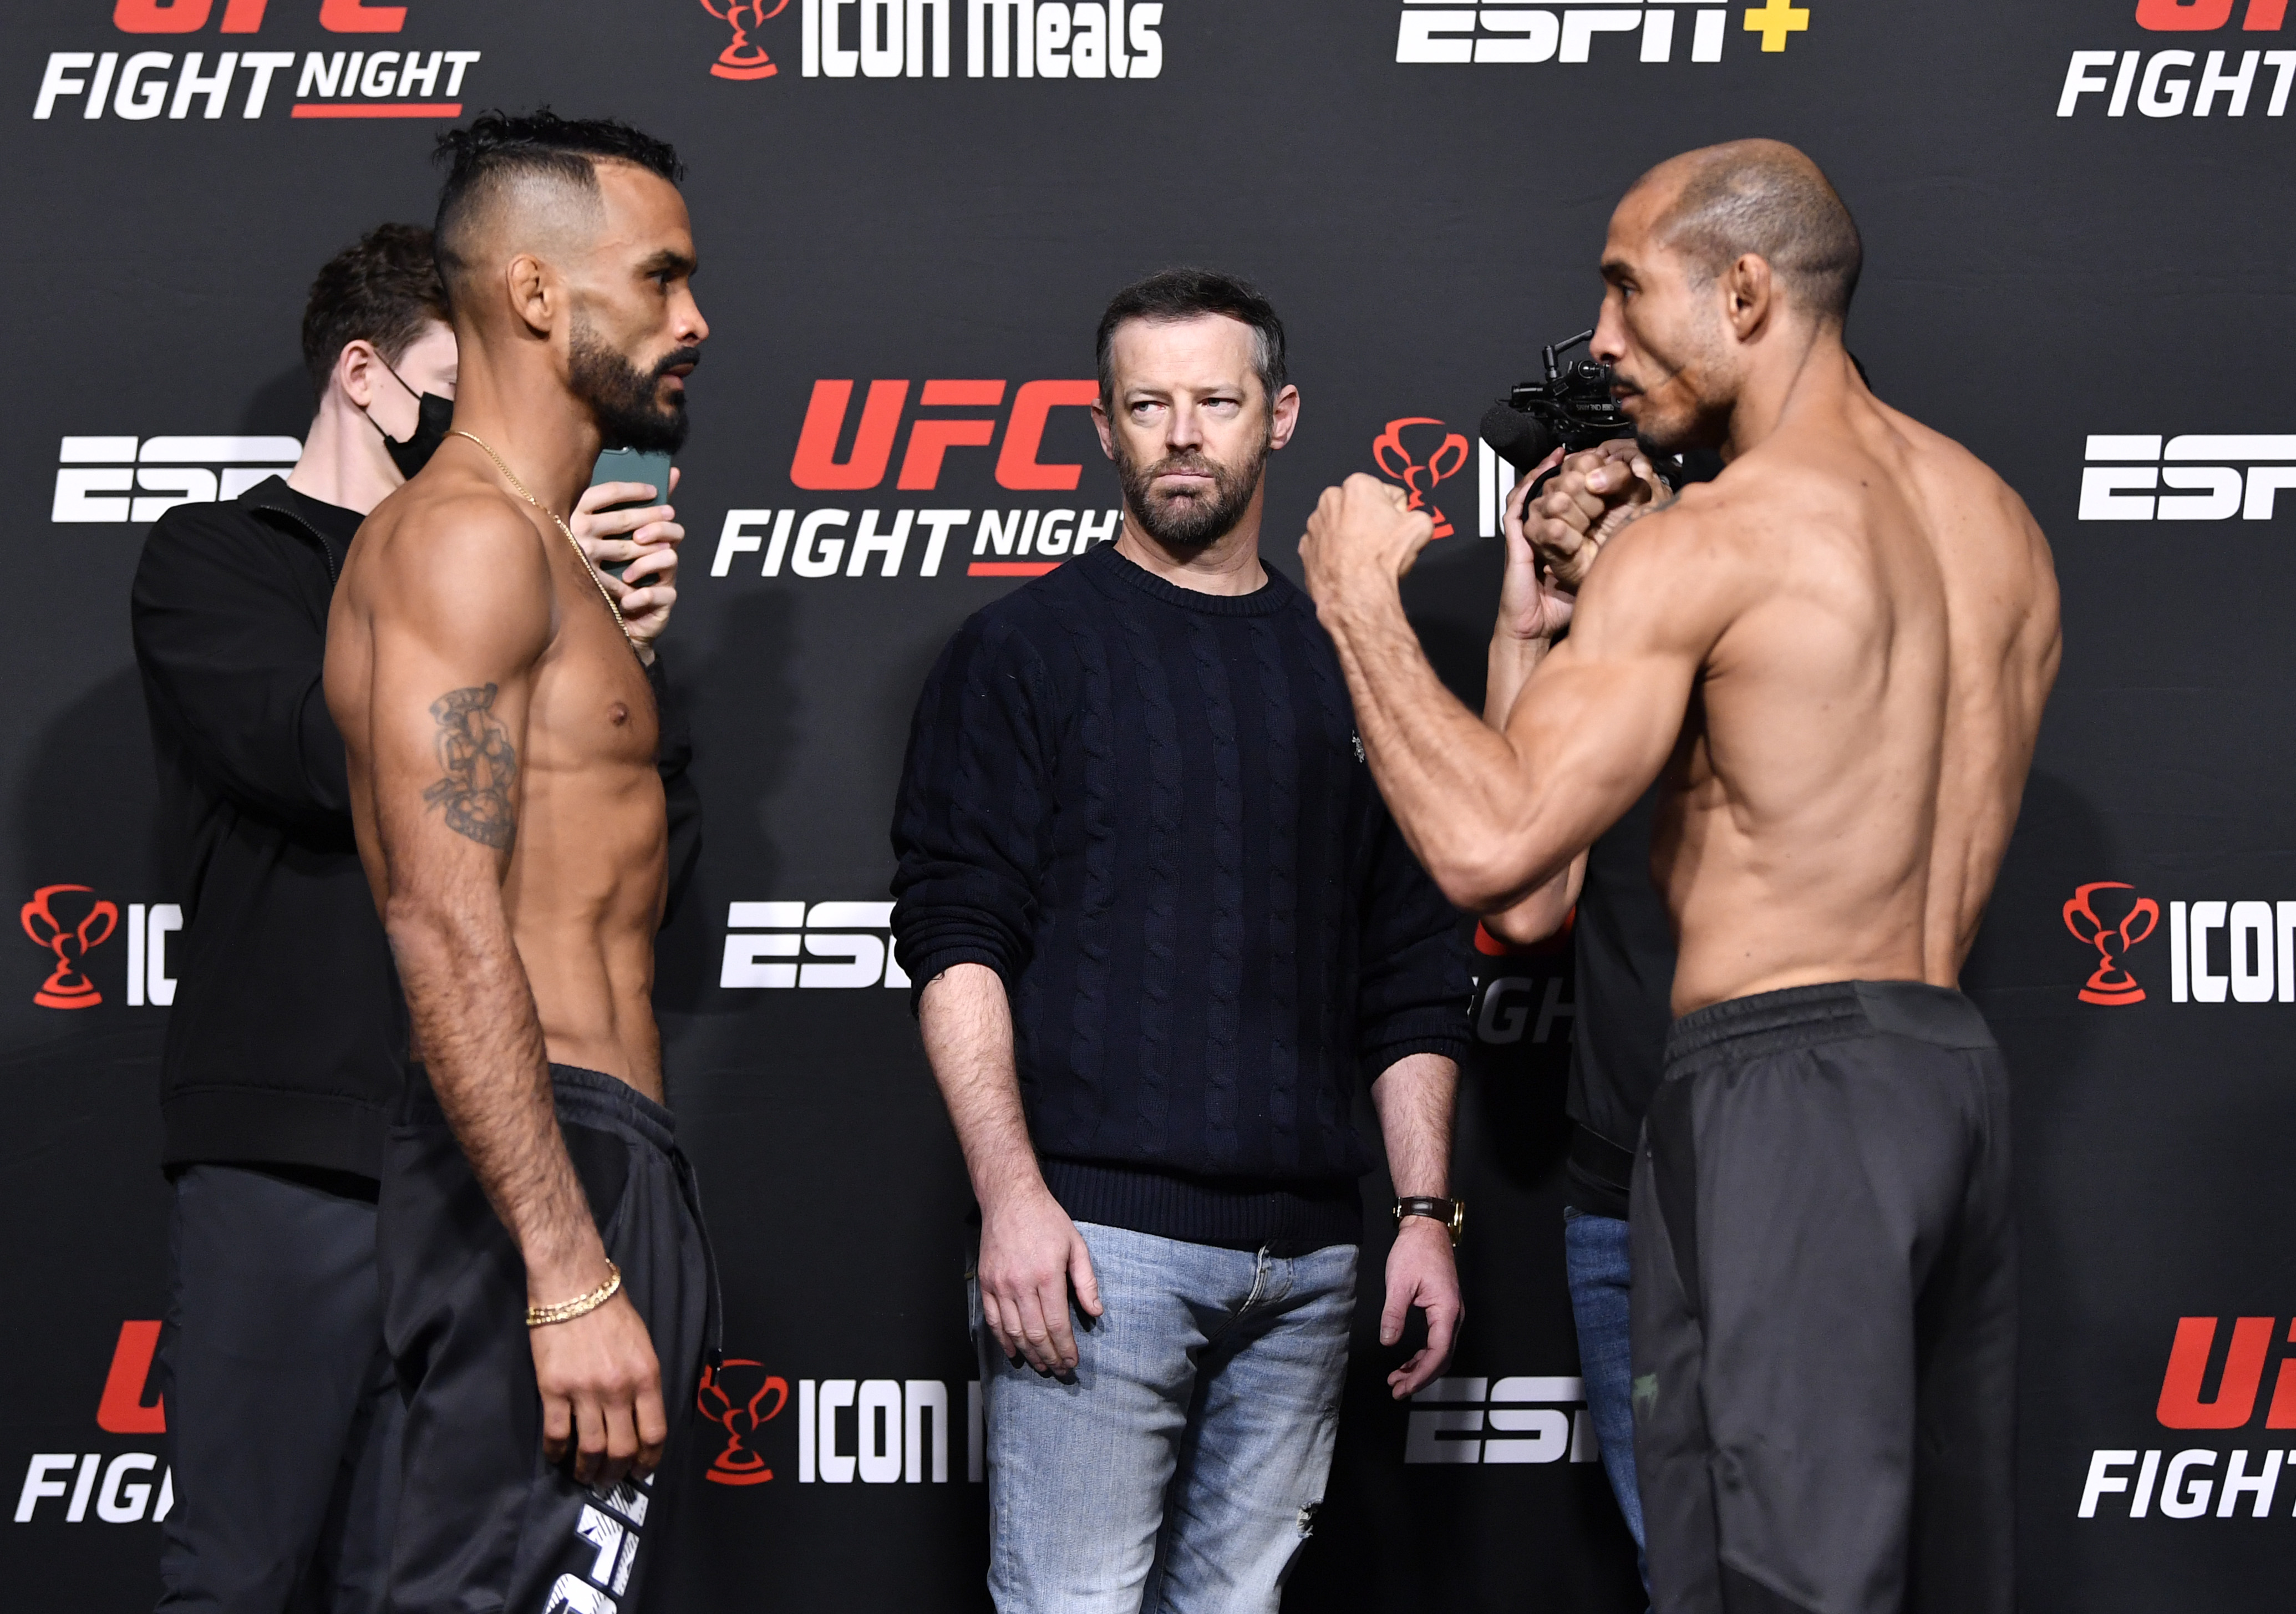 Opponents Rob Font and Jose Aldo of Brazil face off during the UFC Fight Night weigh-in at UFC APEX on December 03, 2021 in Las Vegas, Nevada.